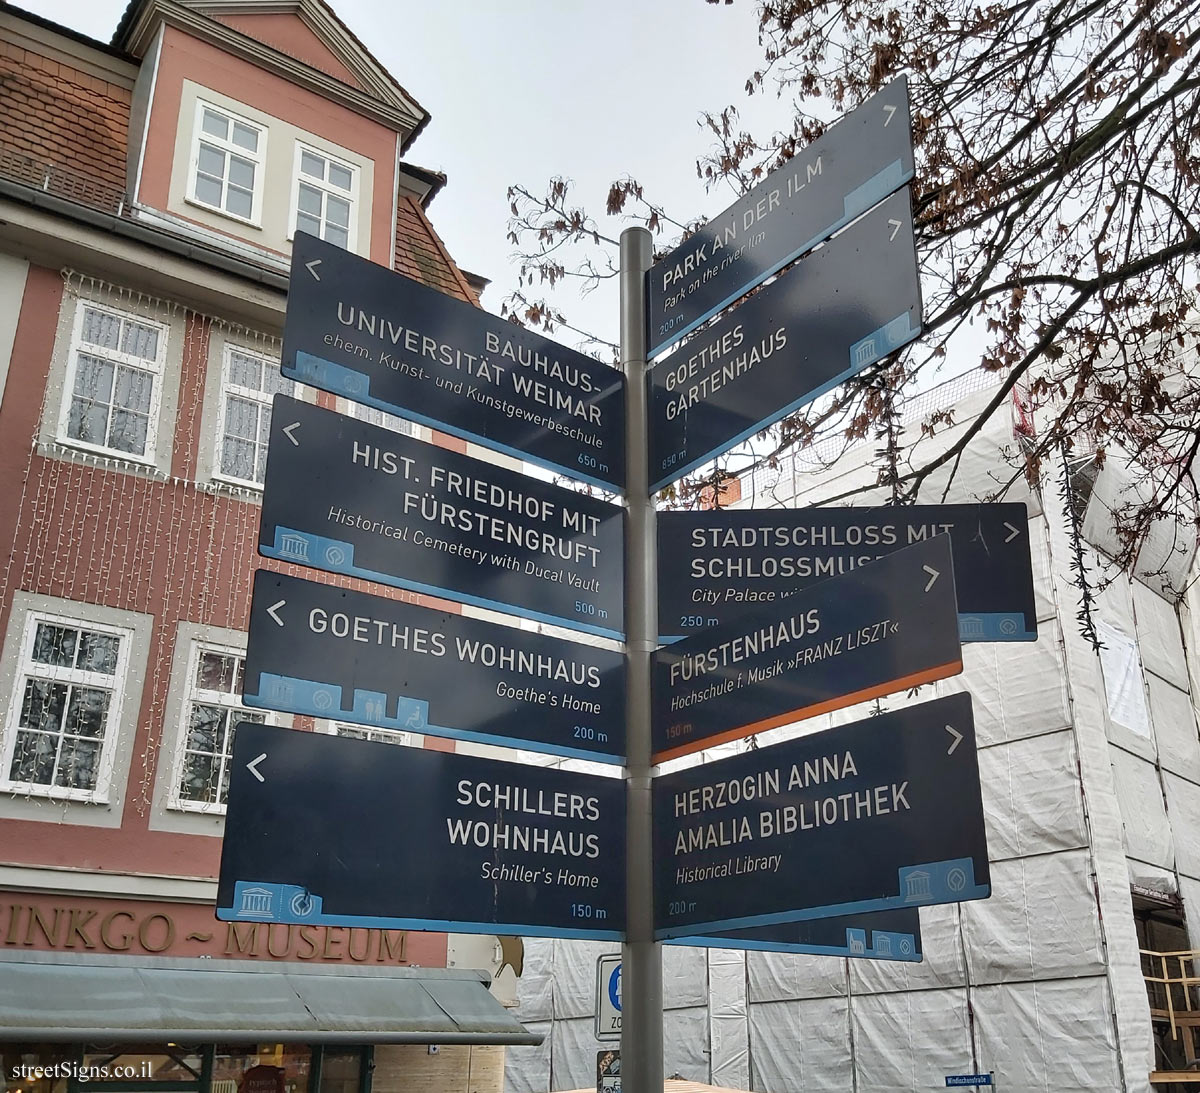 Weimar - Direction signs for city sites including Goethe and Schiller’s home